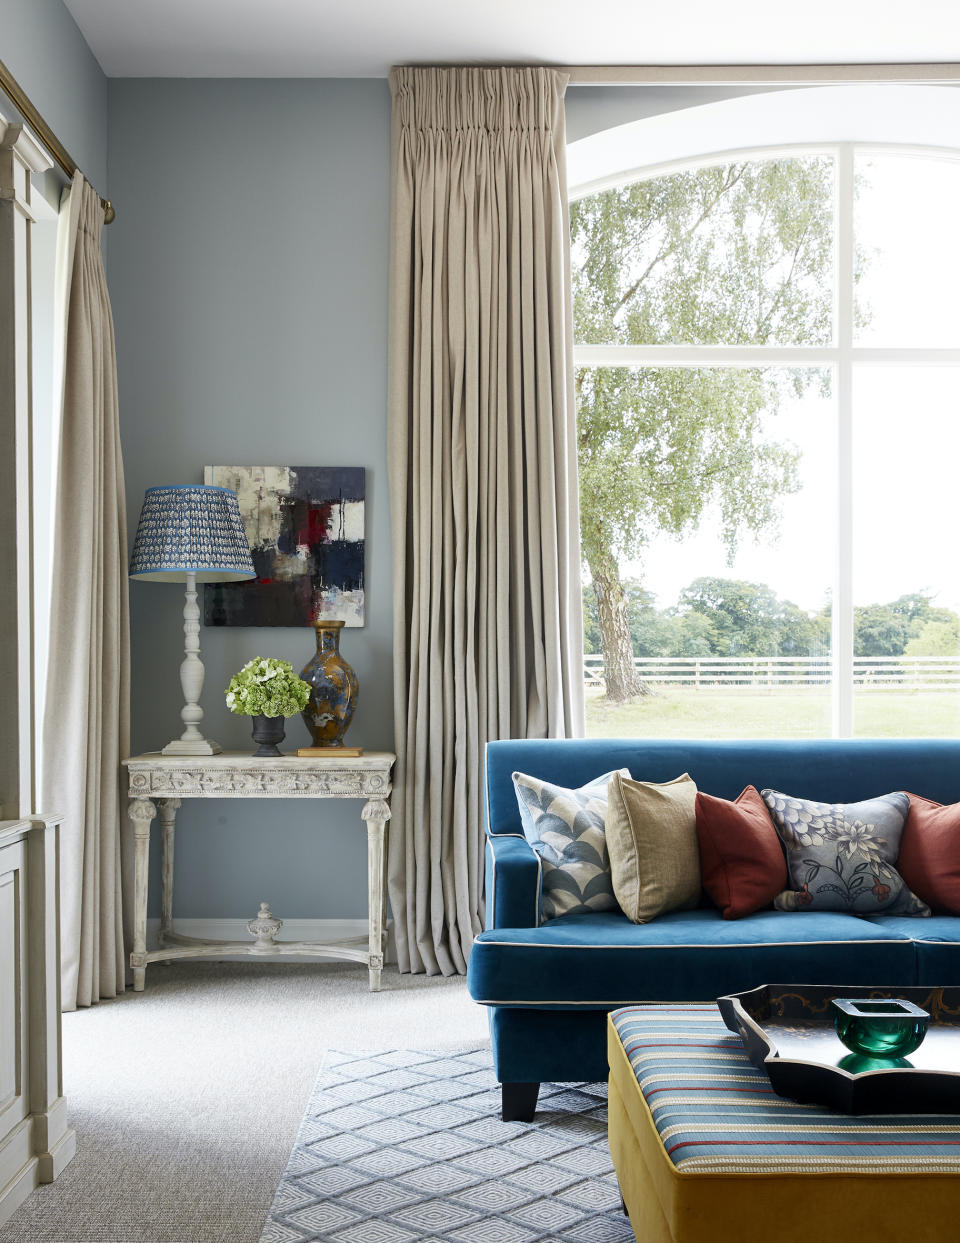 living room with blue couch, cream drapes, console, table lamps, patterned cushions, footstool